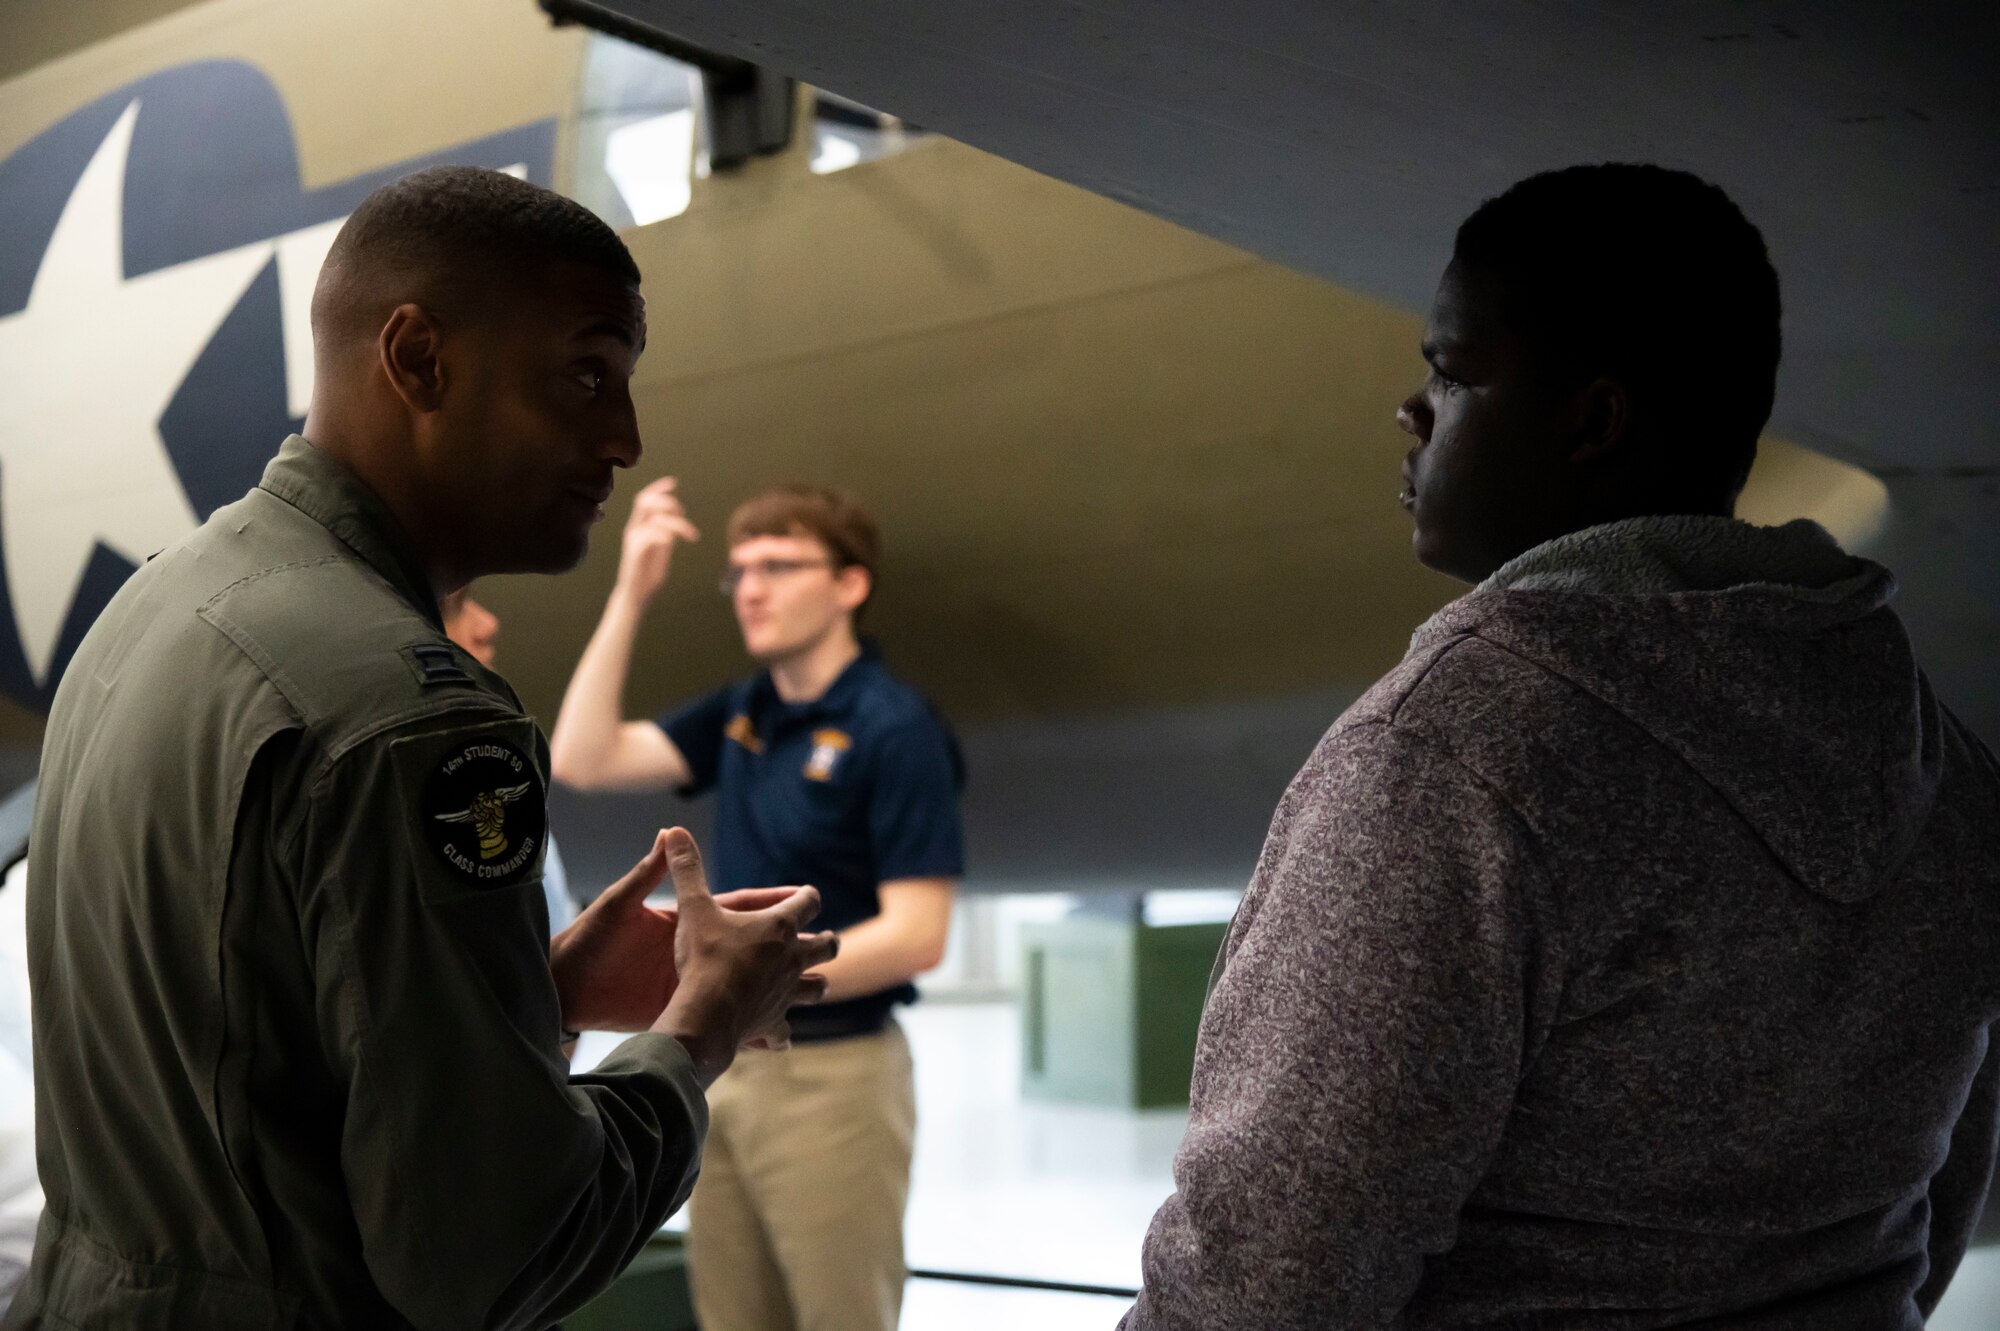 Capt. Matthew Jones, 14th Student Squadron T-6 instructor pilot, talks to a student from the Organization of Black Aerospace Professionals during an immersion tour at the Air Mobility Command Museum in Dover, Delaware, June 21, 2022. Along with being the assigned group mentor, Jones gave students personal insight into the military lifestyle and his own experiences as a member of the aviation community in the Air Force. (U.S. Air Force photo by Staff Sgt. Marco A. Gomez)